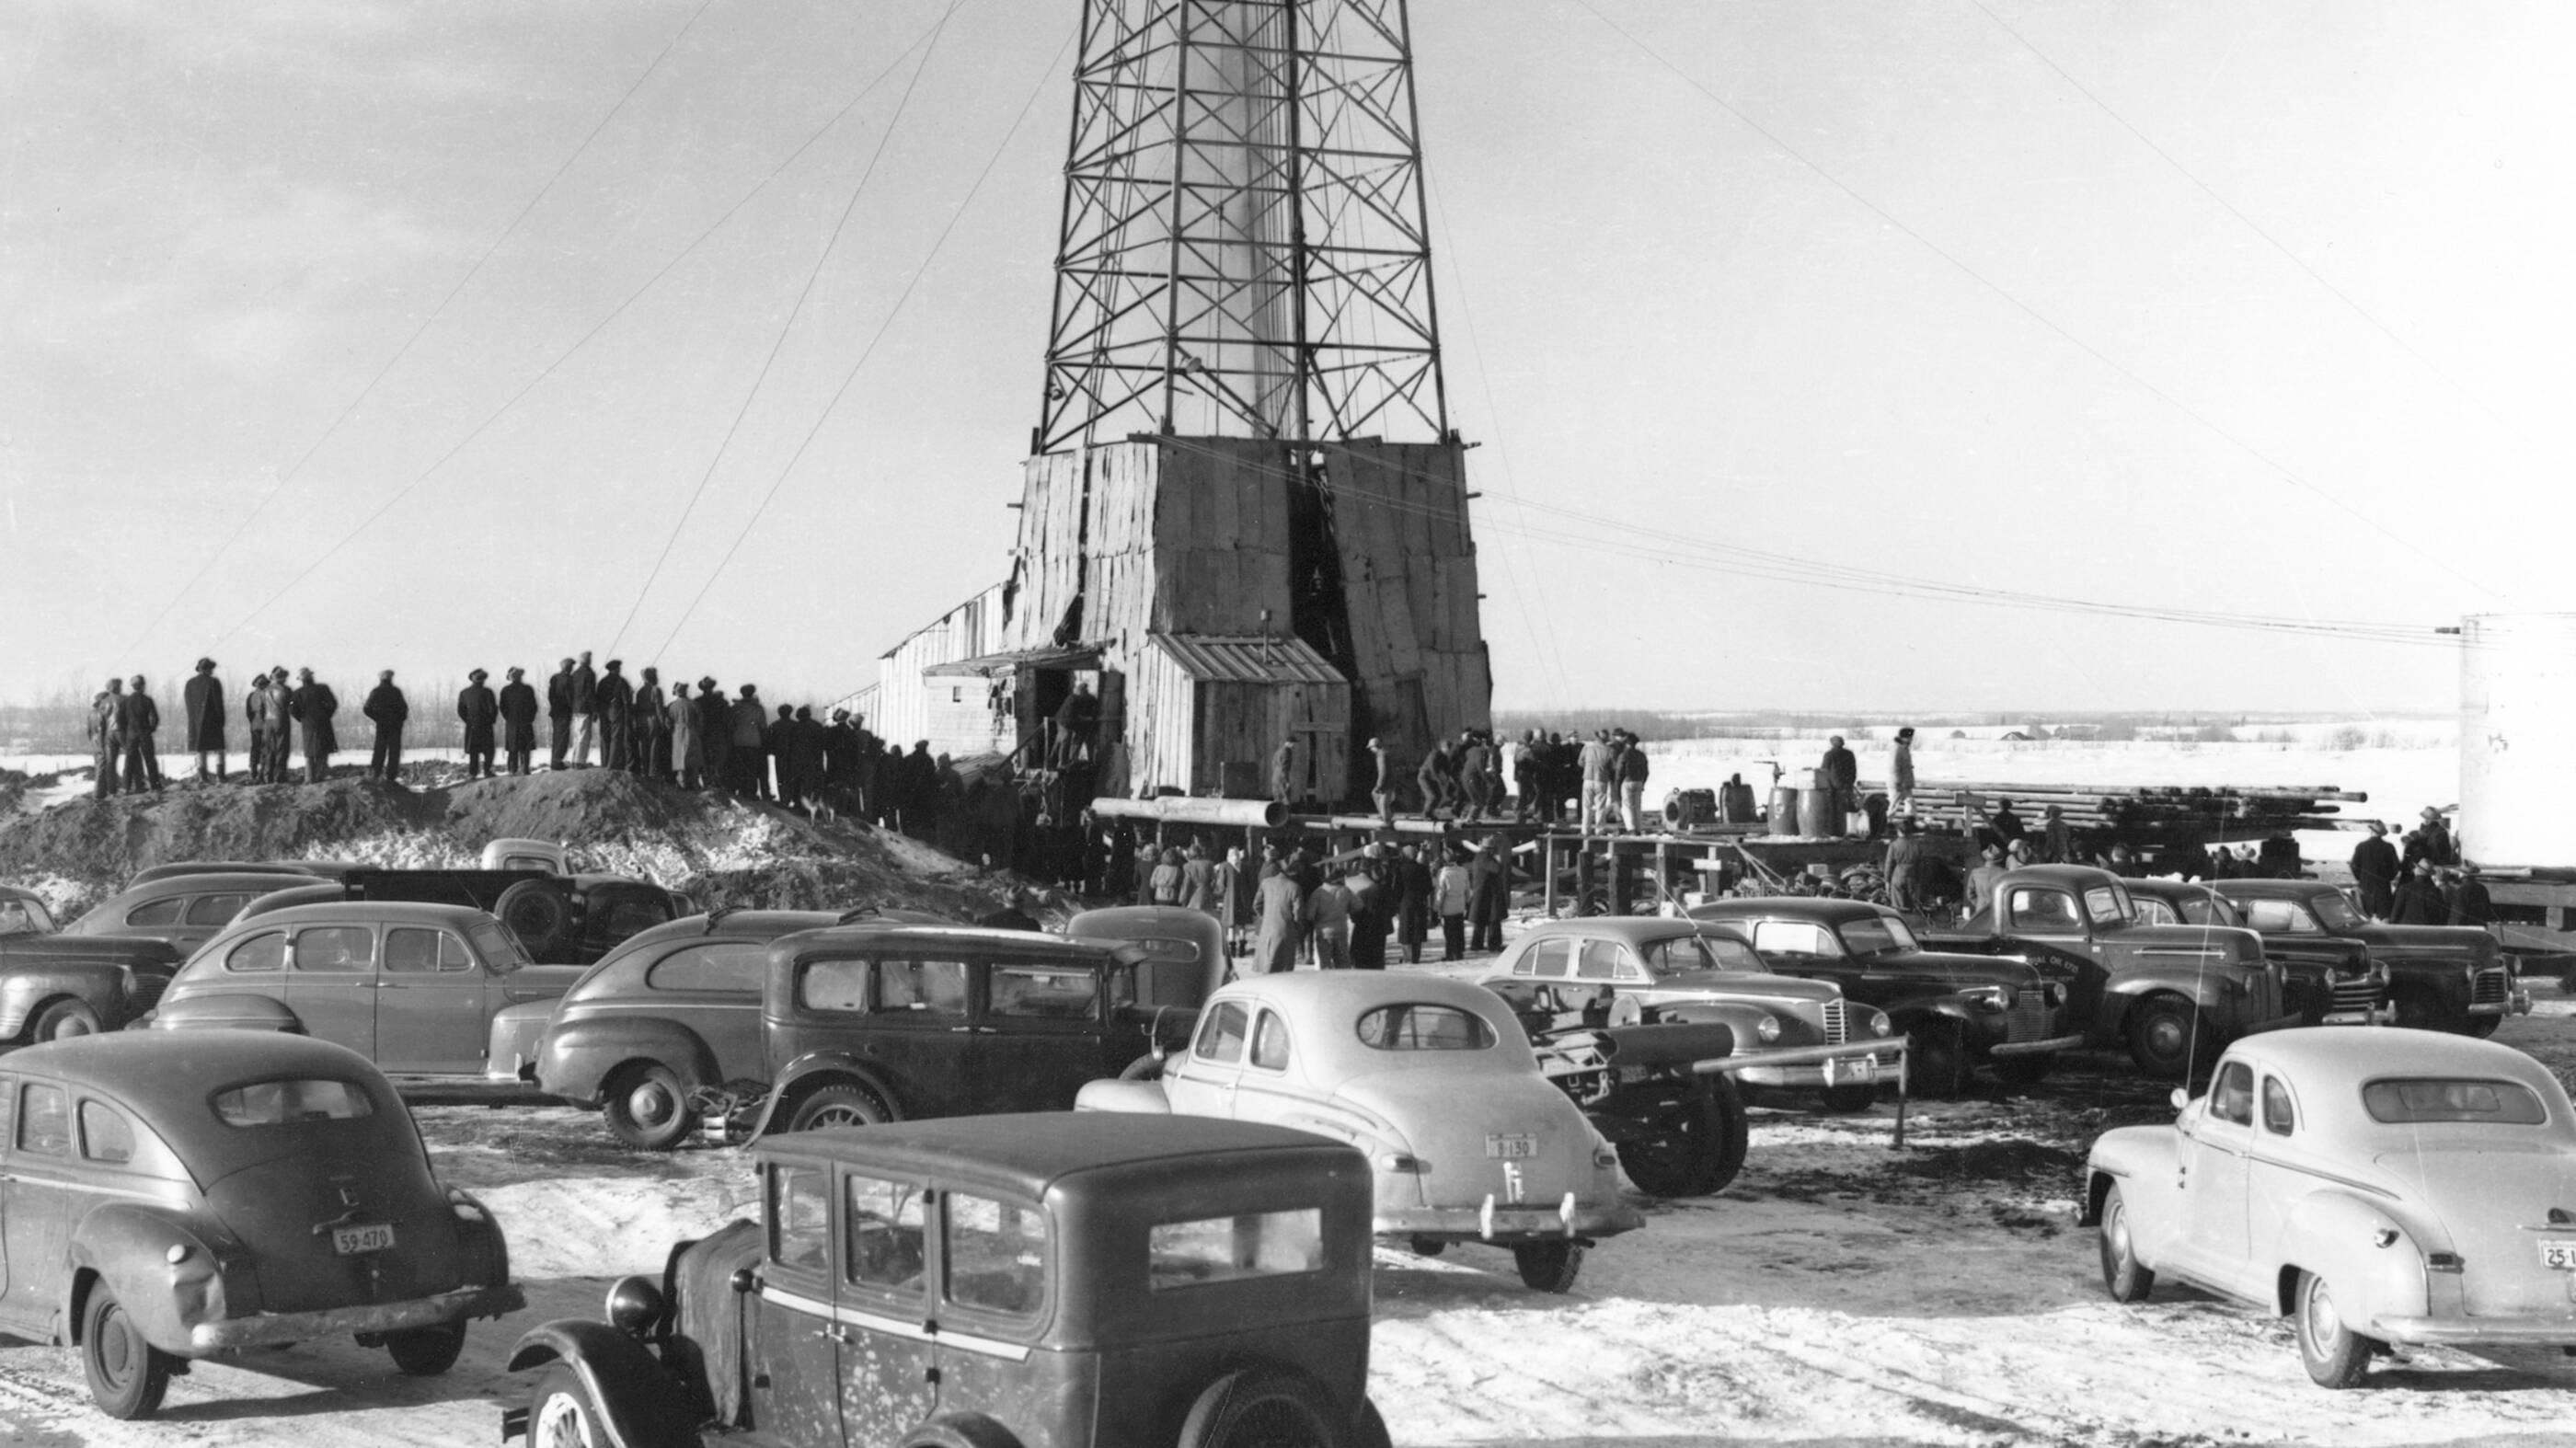 Imperial discovers oil at Leduc, marking the beginning of Western Canadas great oil development.